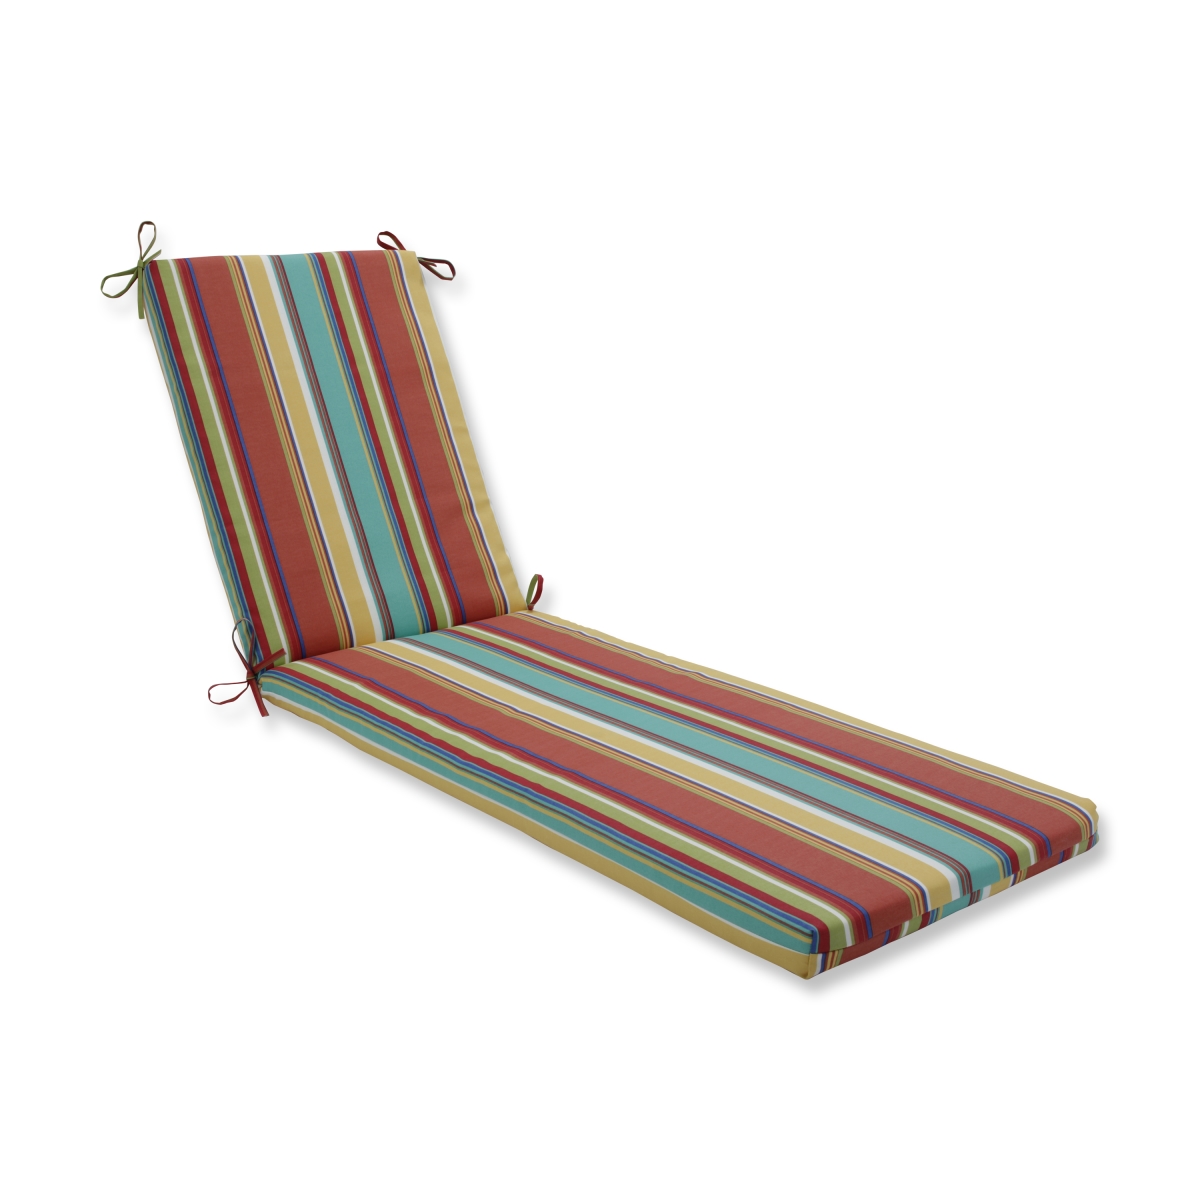 80 X 23 X 3 In. Outdoor & Indoor Westport Spring Chaise Lounge Cushion, Multicolored